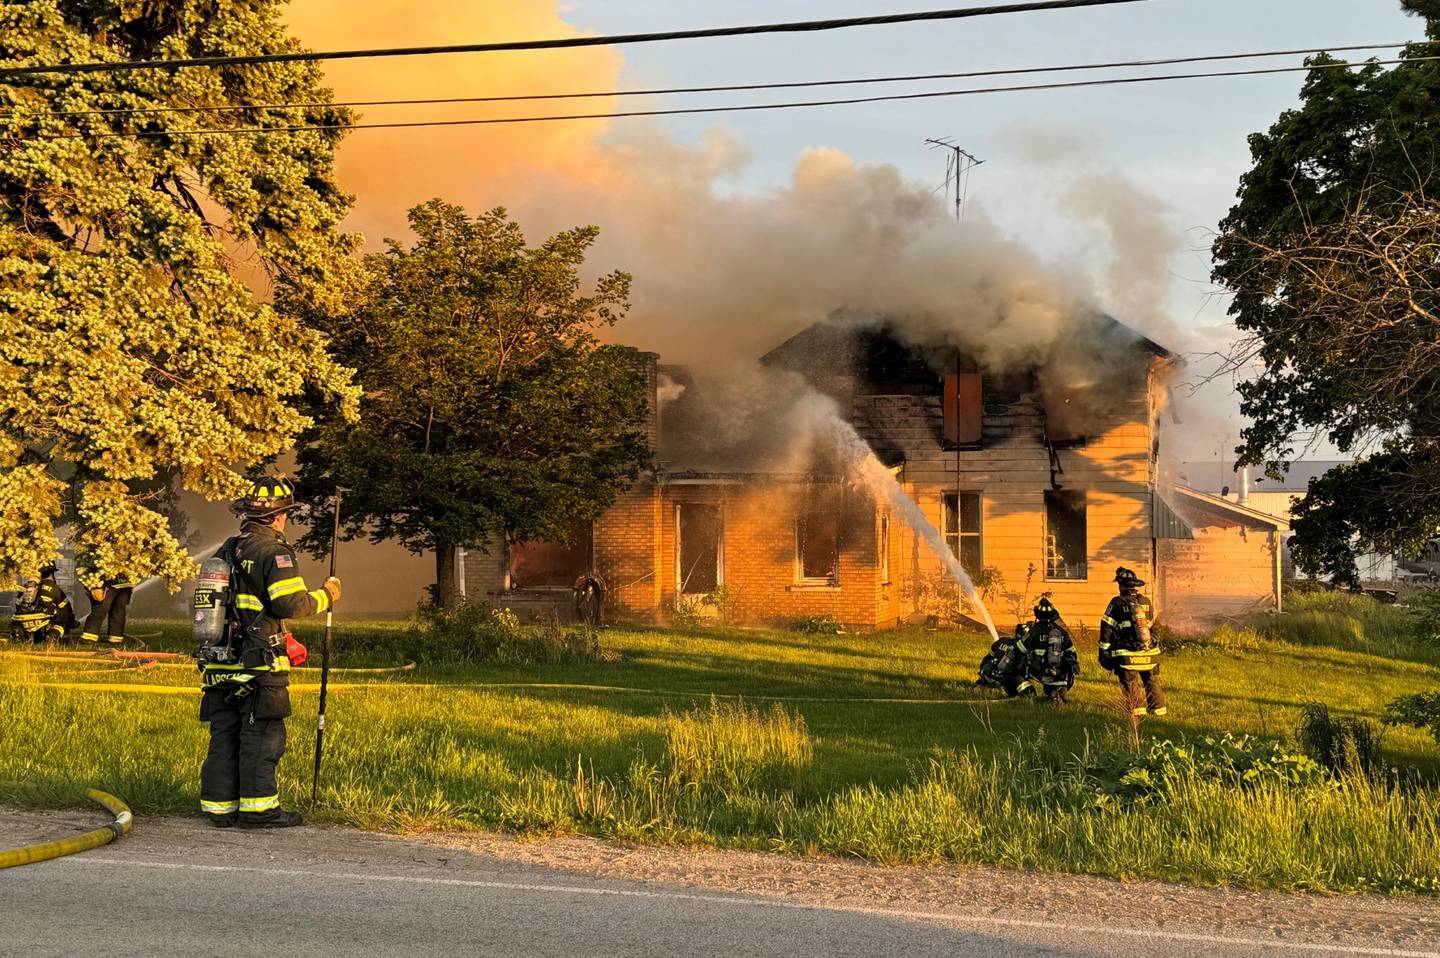 At 7:22 p.m. Friday, the Lockport Township Fire Protection District responded to a reported structure fire in the 1200 block of Caton Farm Road. The house was unoccupied at the time and no injuries were reported.